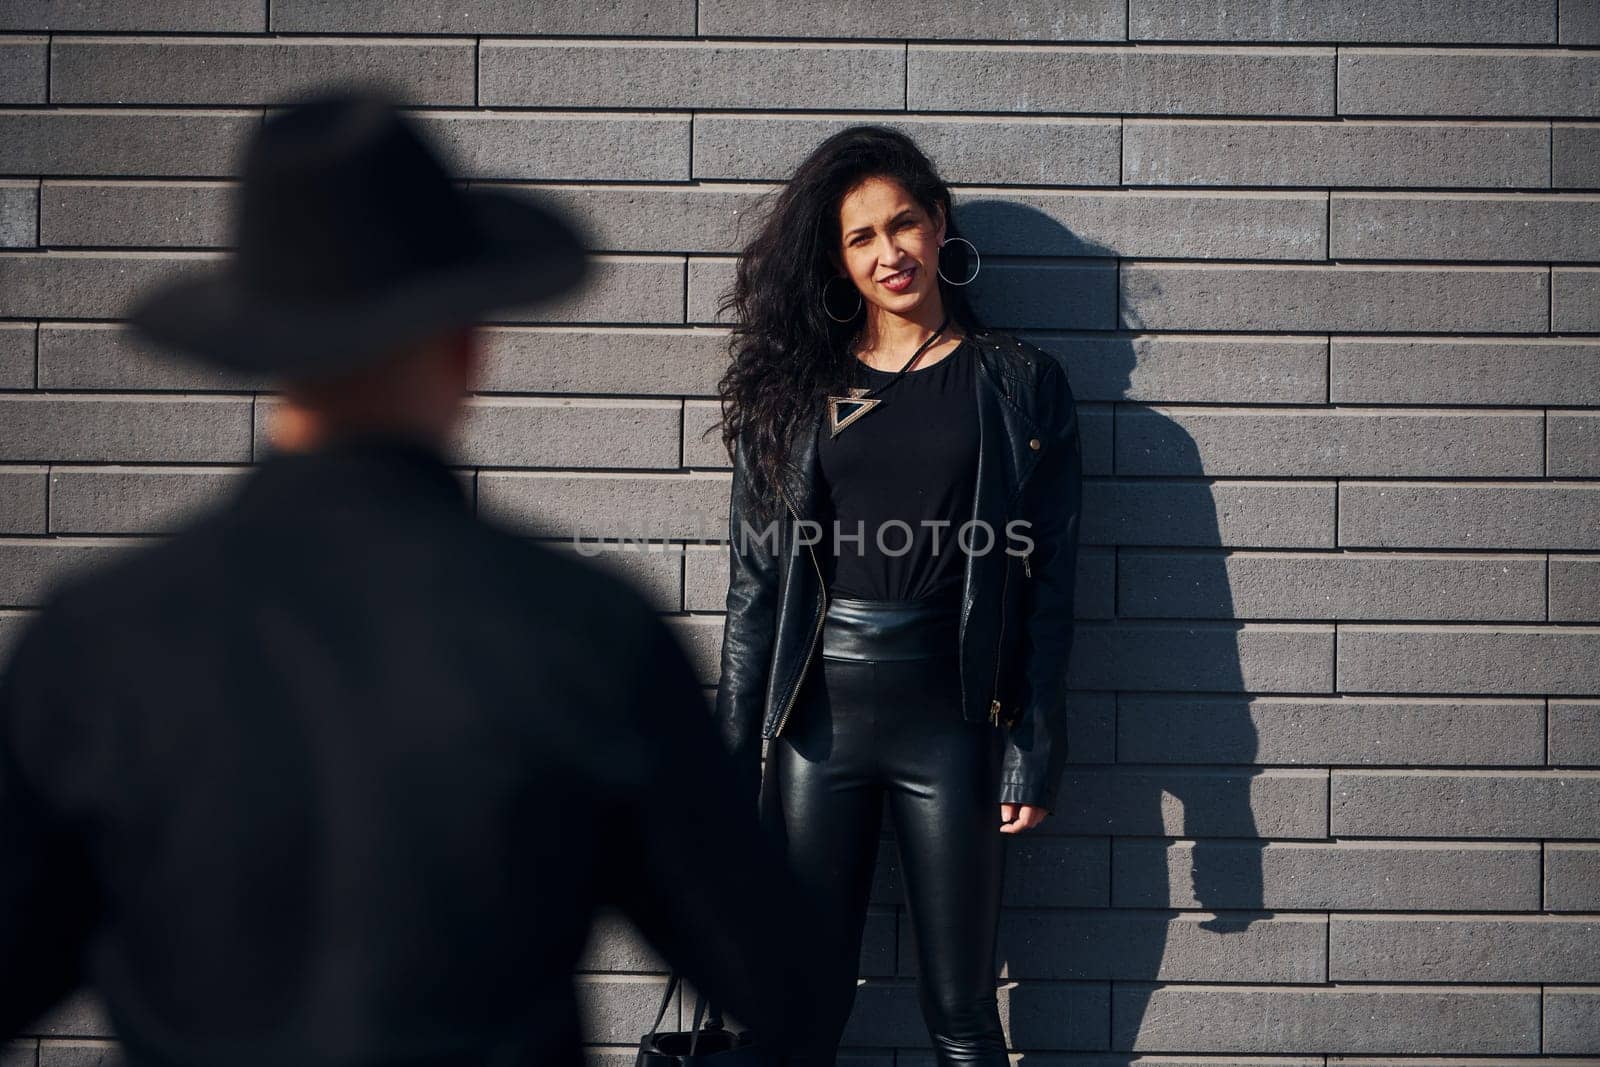 Beautiful couple in black clothes together against wall outdoors.